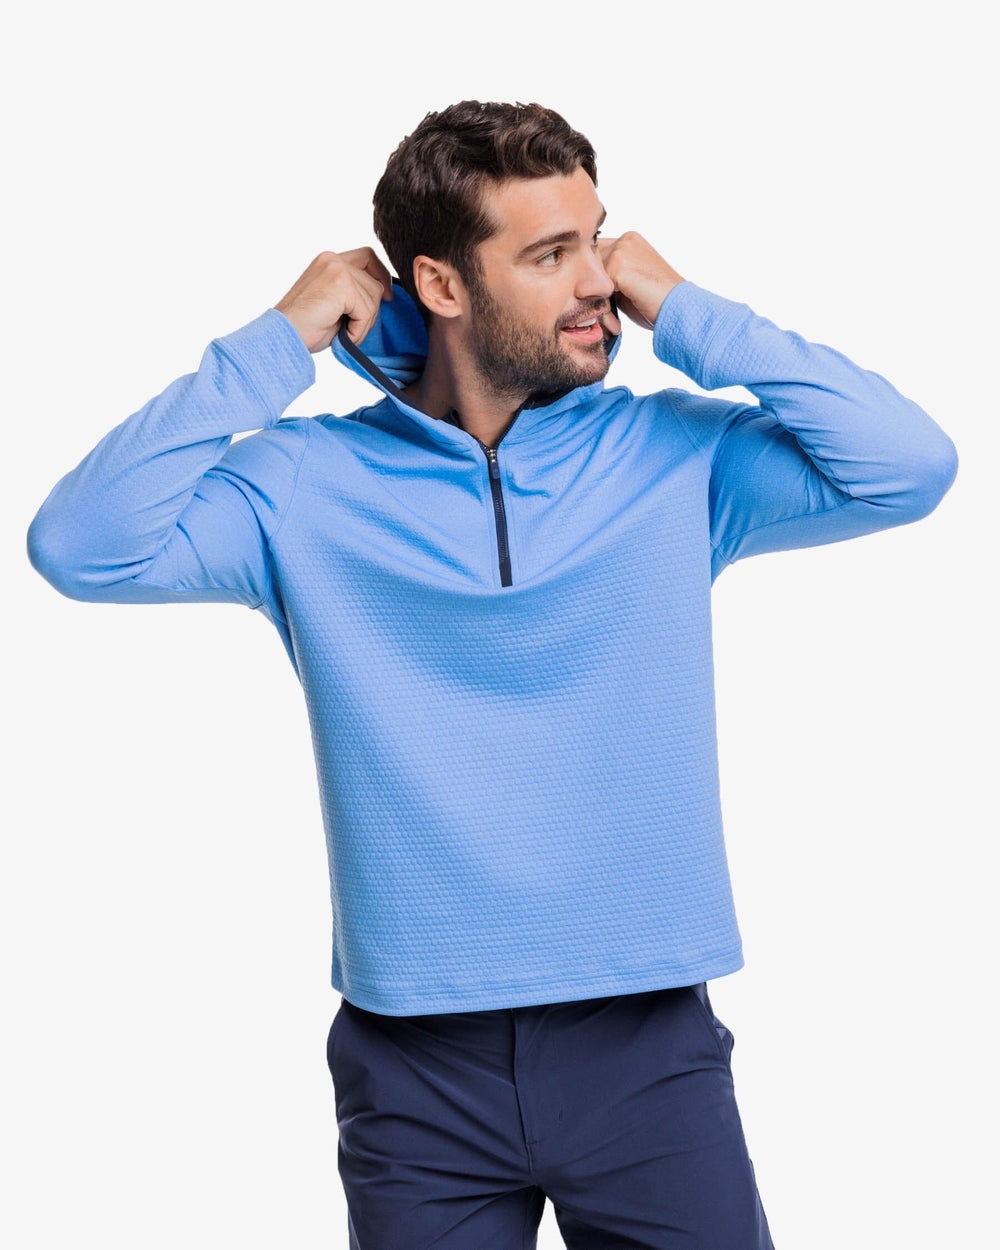 The front hood view of the Southern Tide Scuttle Heather Performance Quarter Zip Hoodie by Southern Tide - Heather Boat Blue